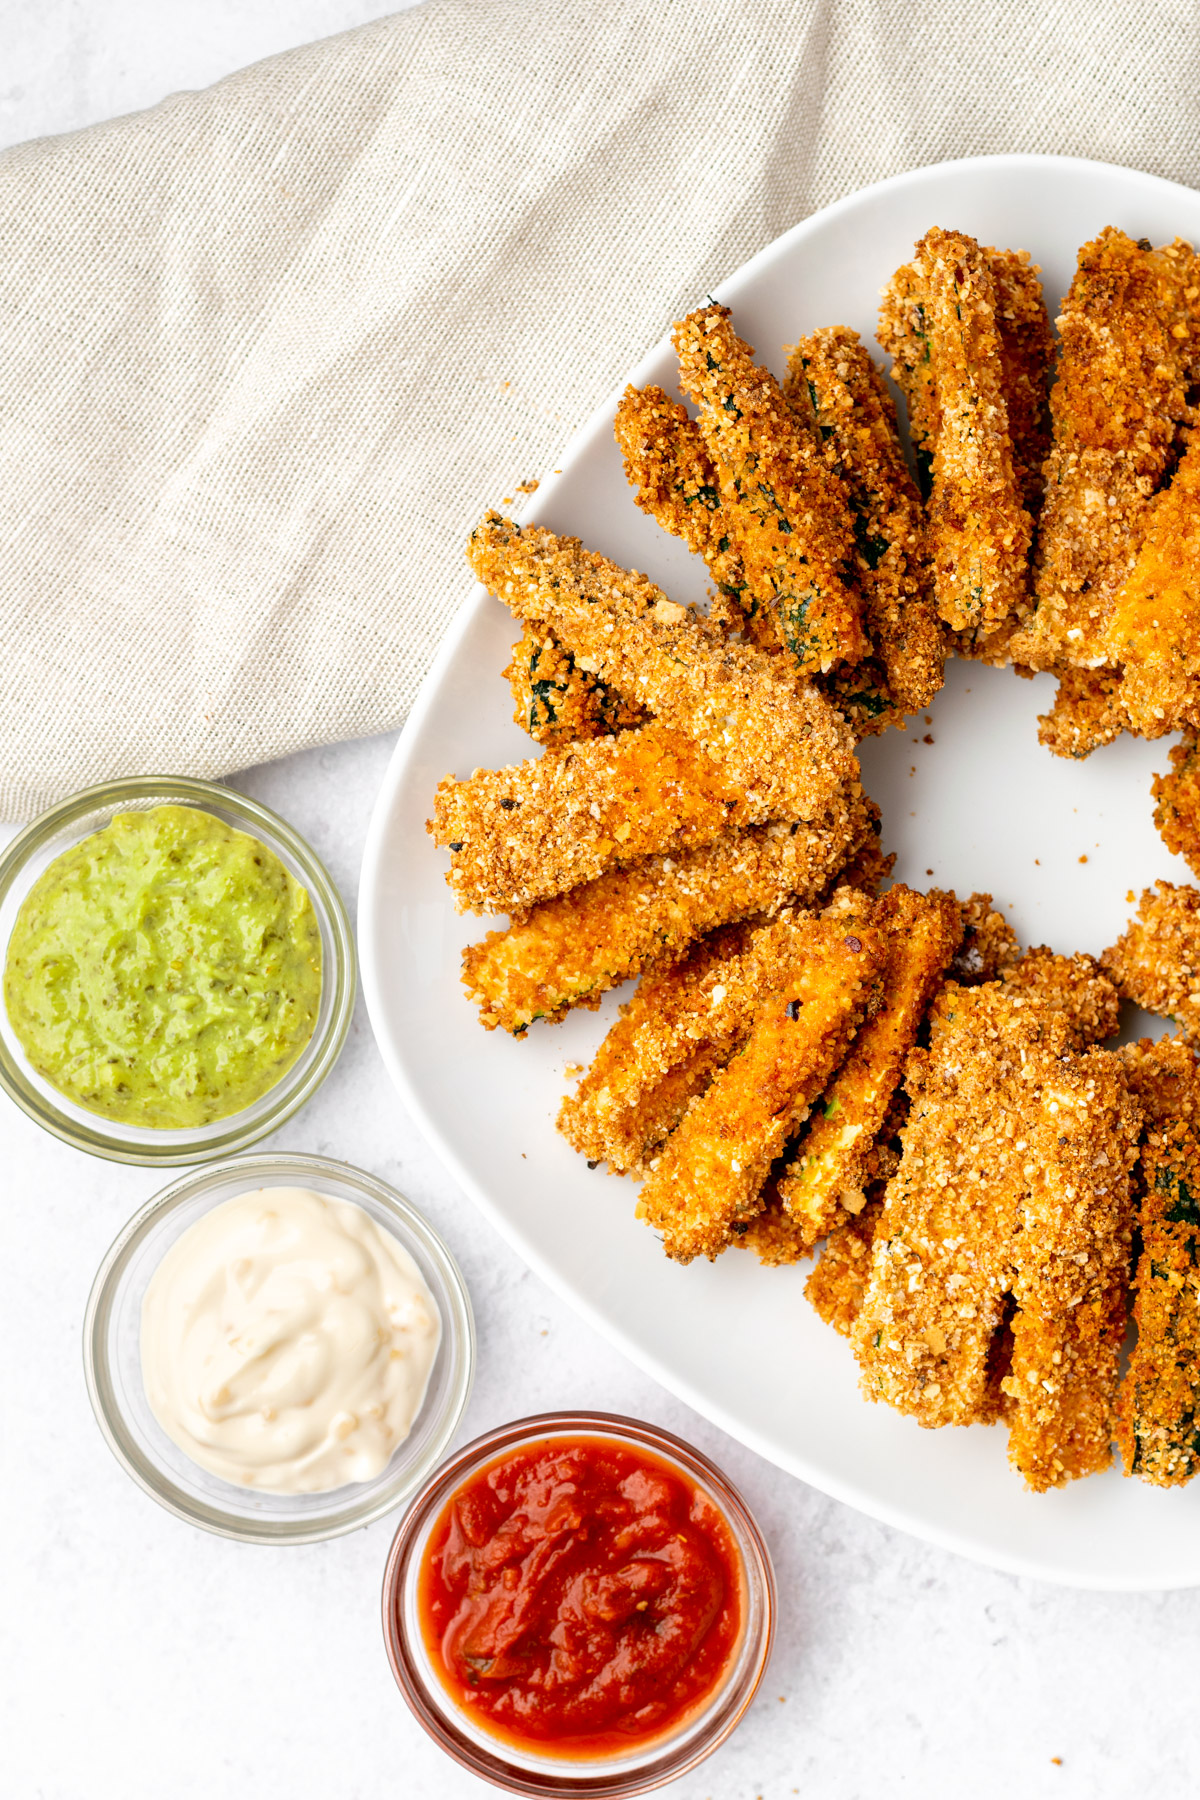 zucchini fries with 3 dipping sauces